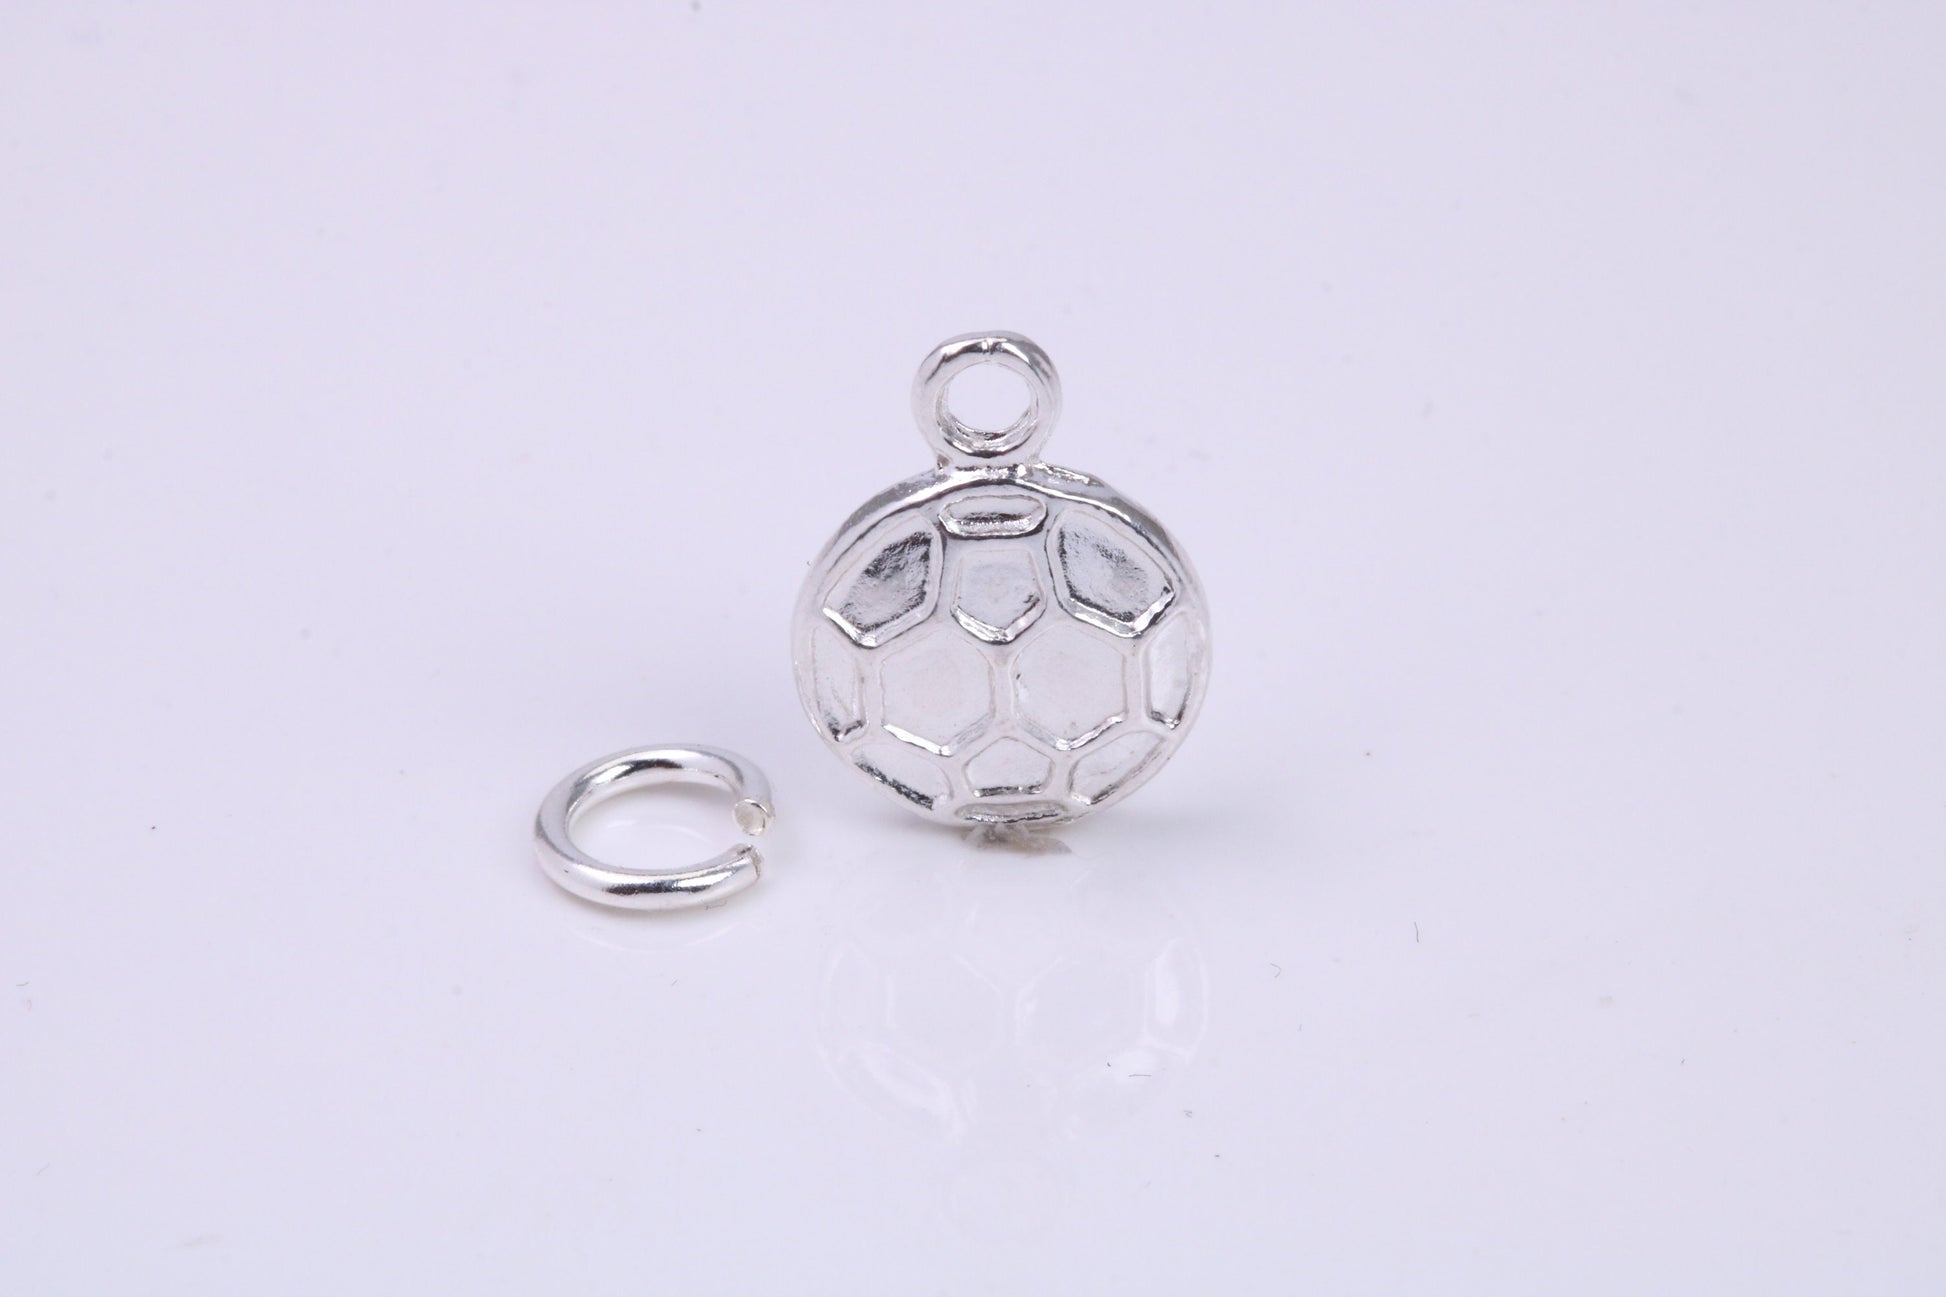 Foot Ball Charm, Traditional Charm, Made from Solid 925 Grade Sterling Silver, Complete with Attachment Link